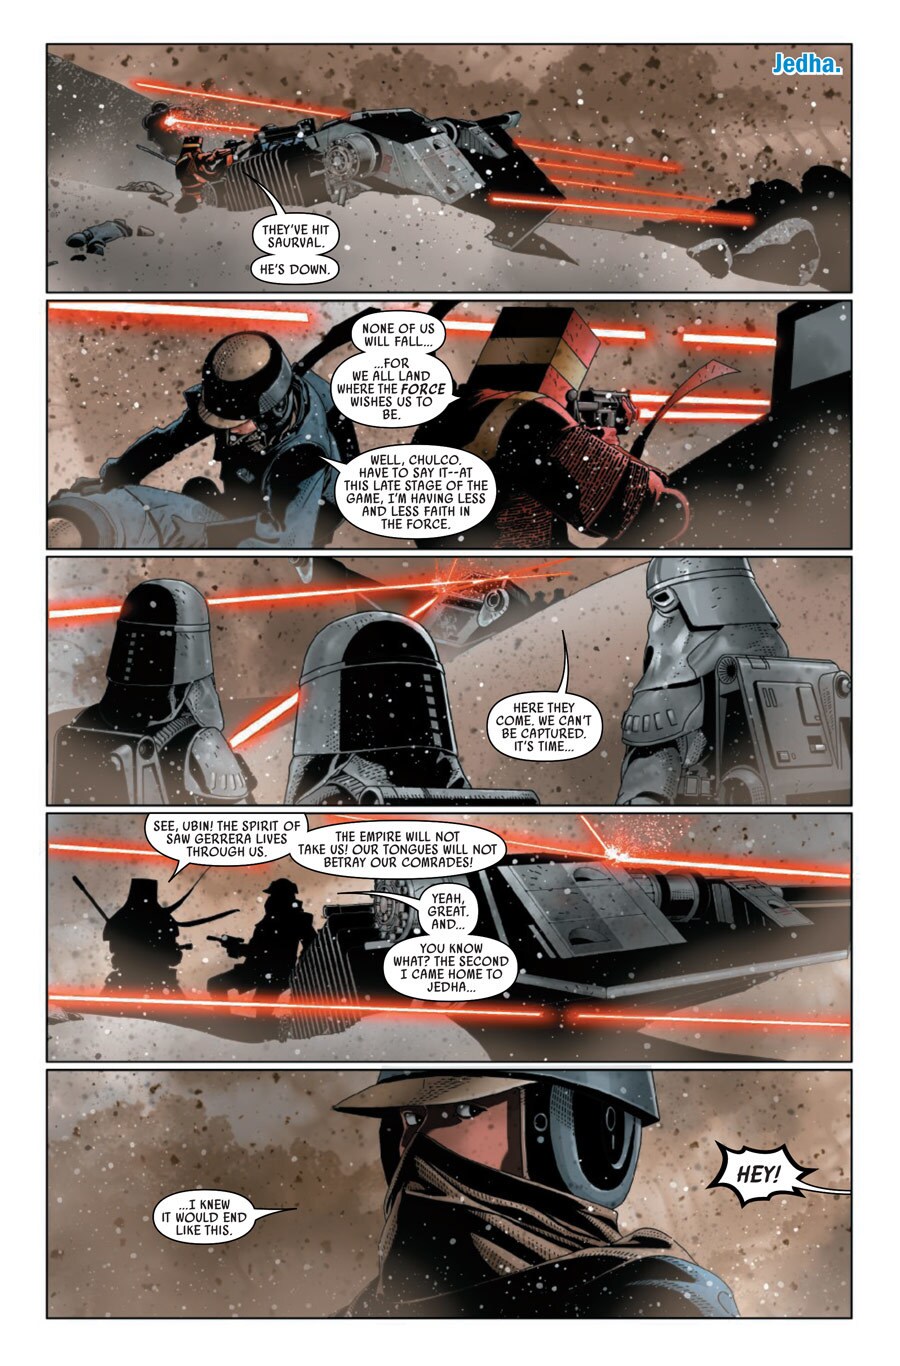 Chulco Gi and Ubin Des fight off Imperial forces in a comic strip.